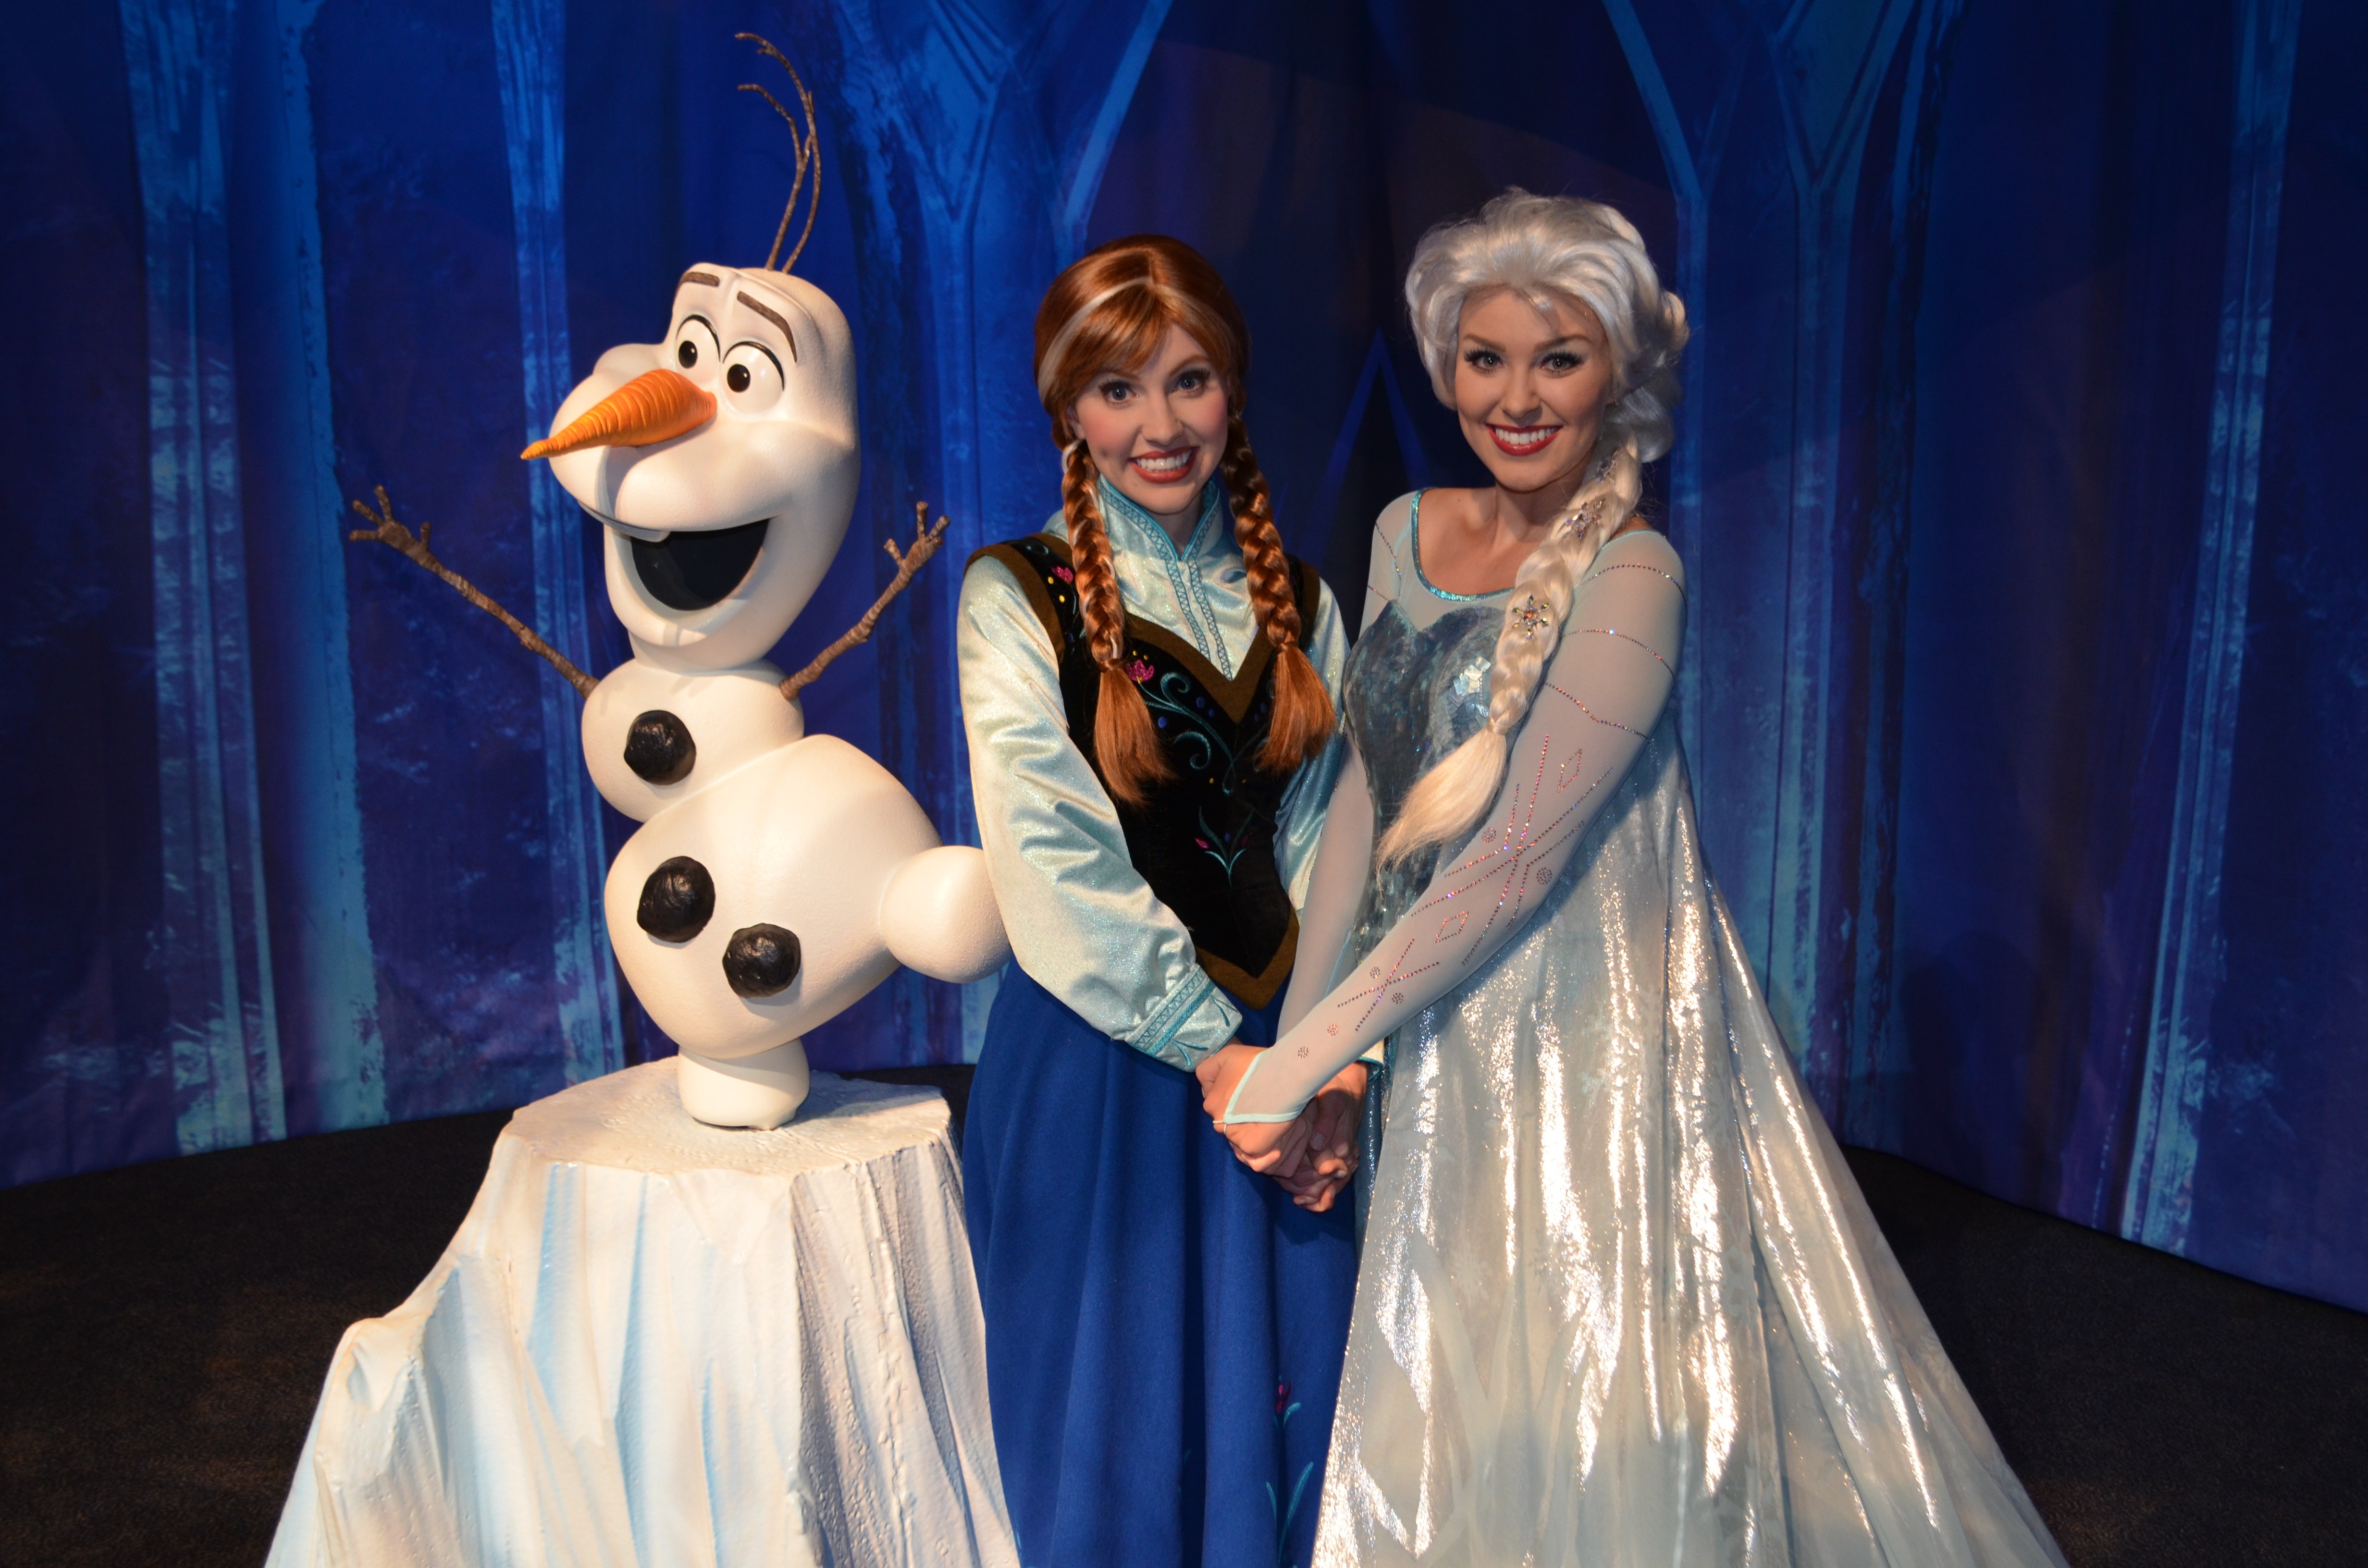 Elsa Takes Over Walt Disney World During The Holidays As ‘frozen